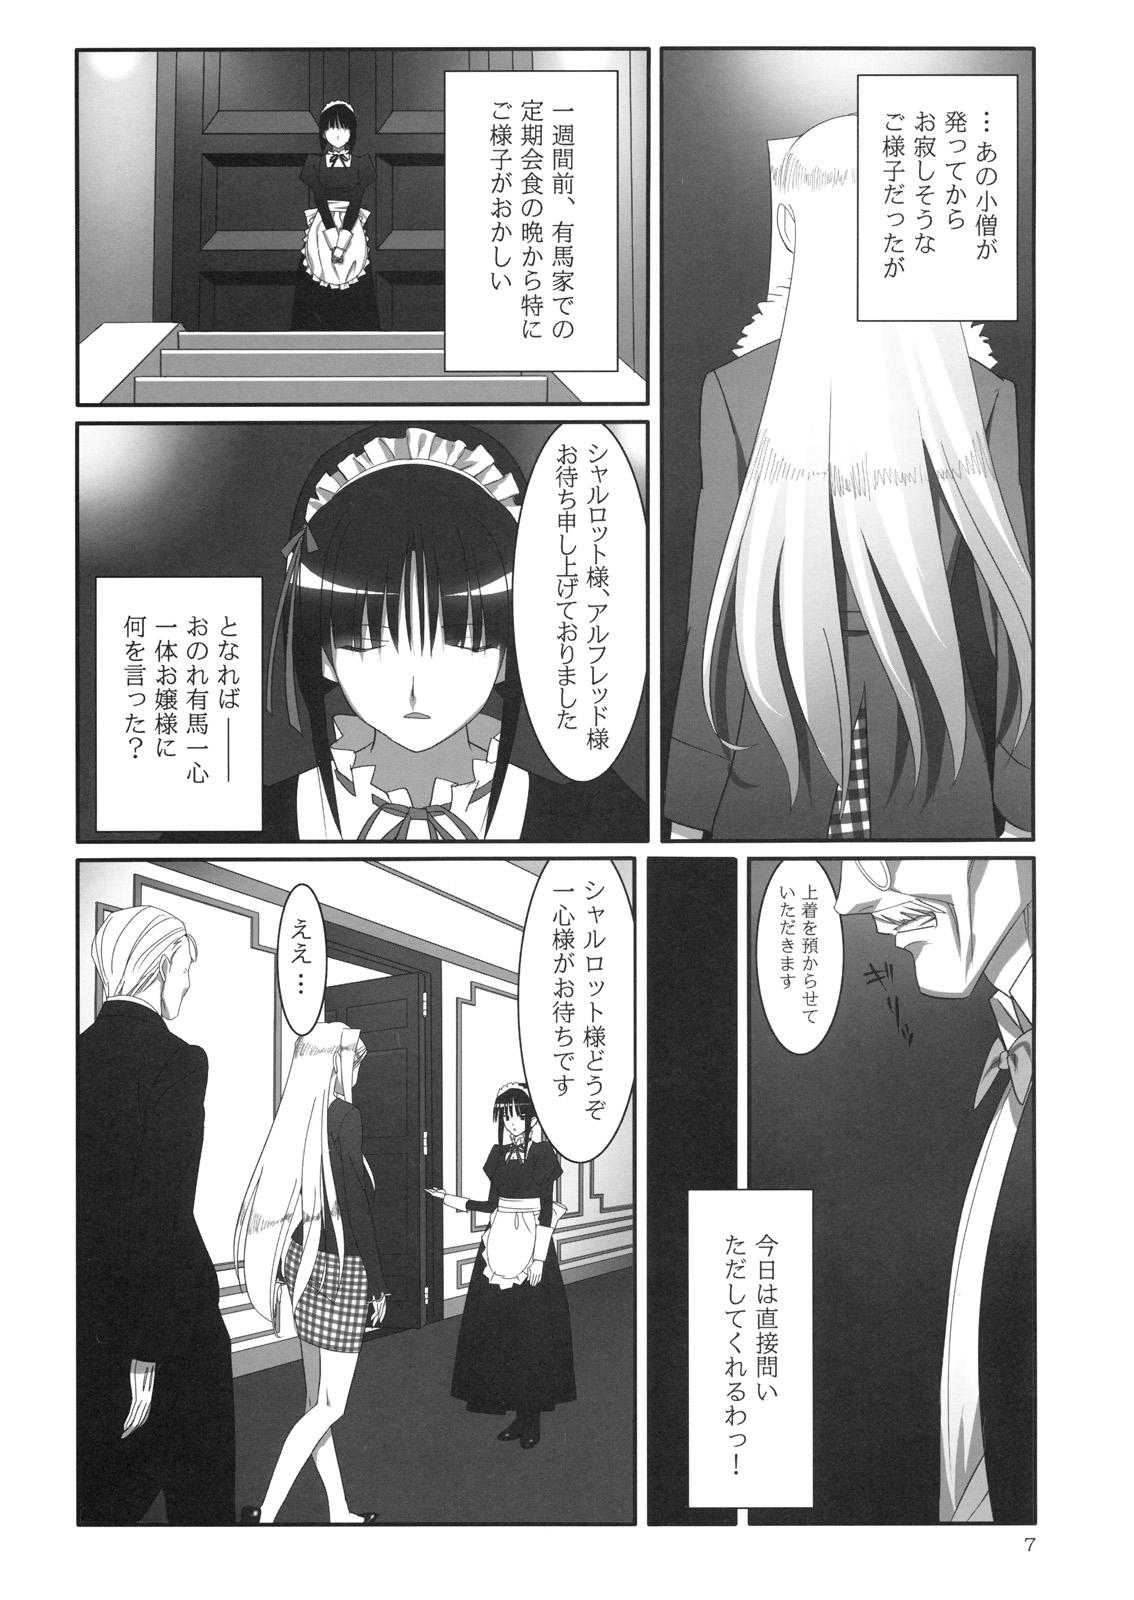 Sologirl Admired beautiful flower. 2 - Princess lover Tetas - Page 6